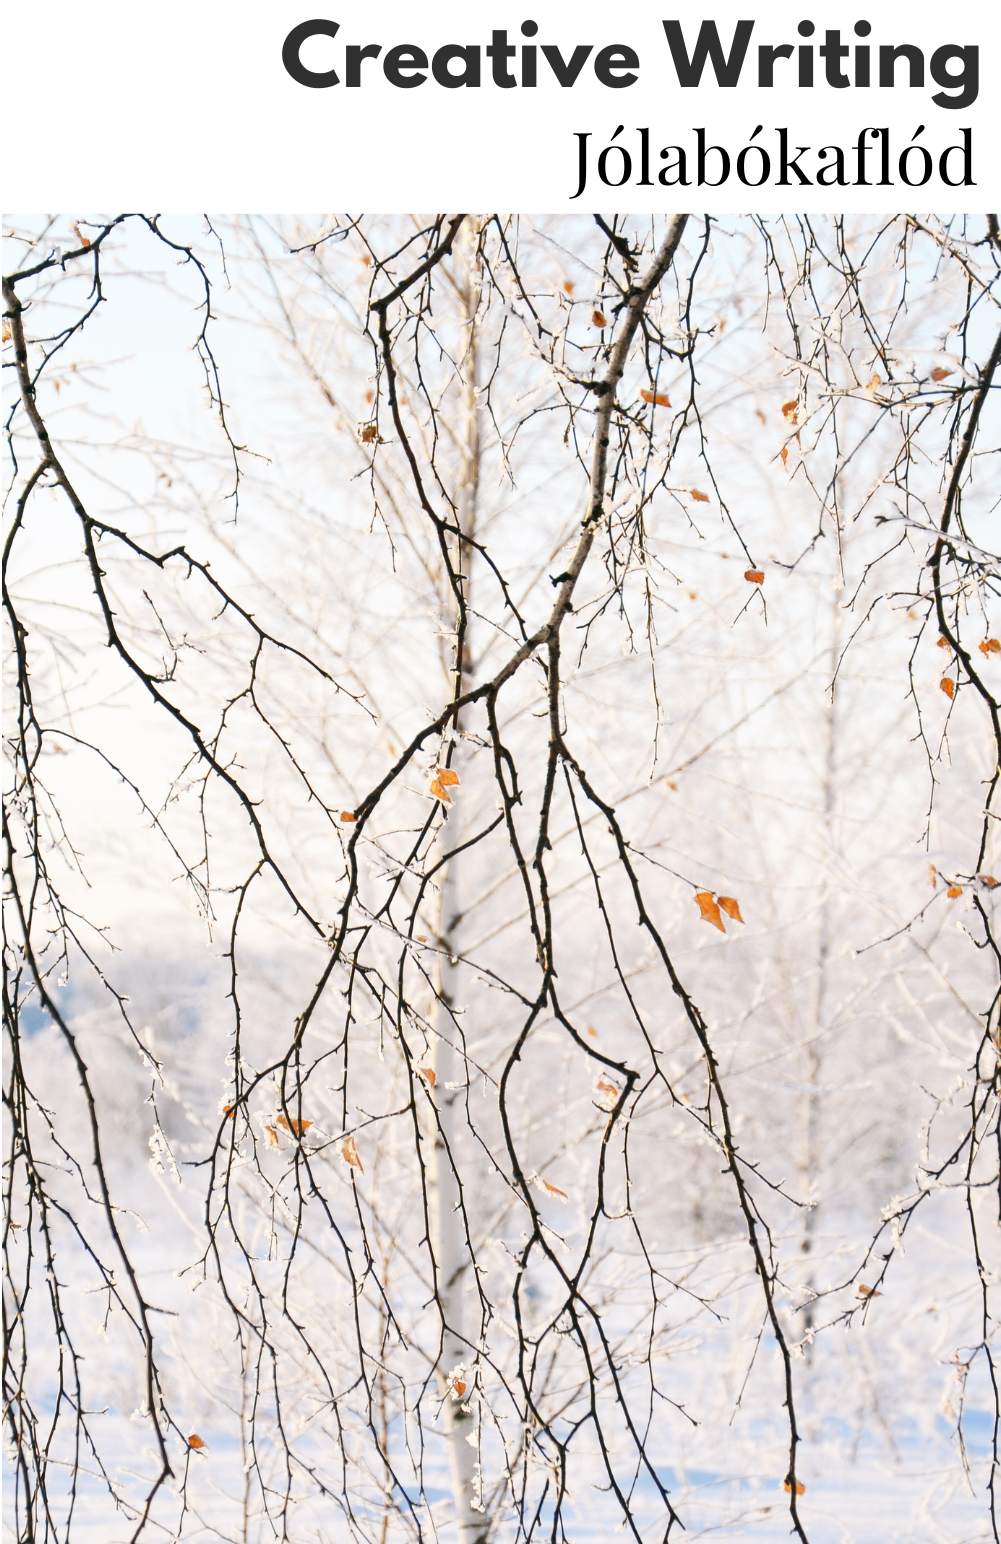 Image of bare birch branches hanging down on a bright and snowy day. 